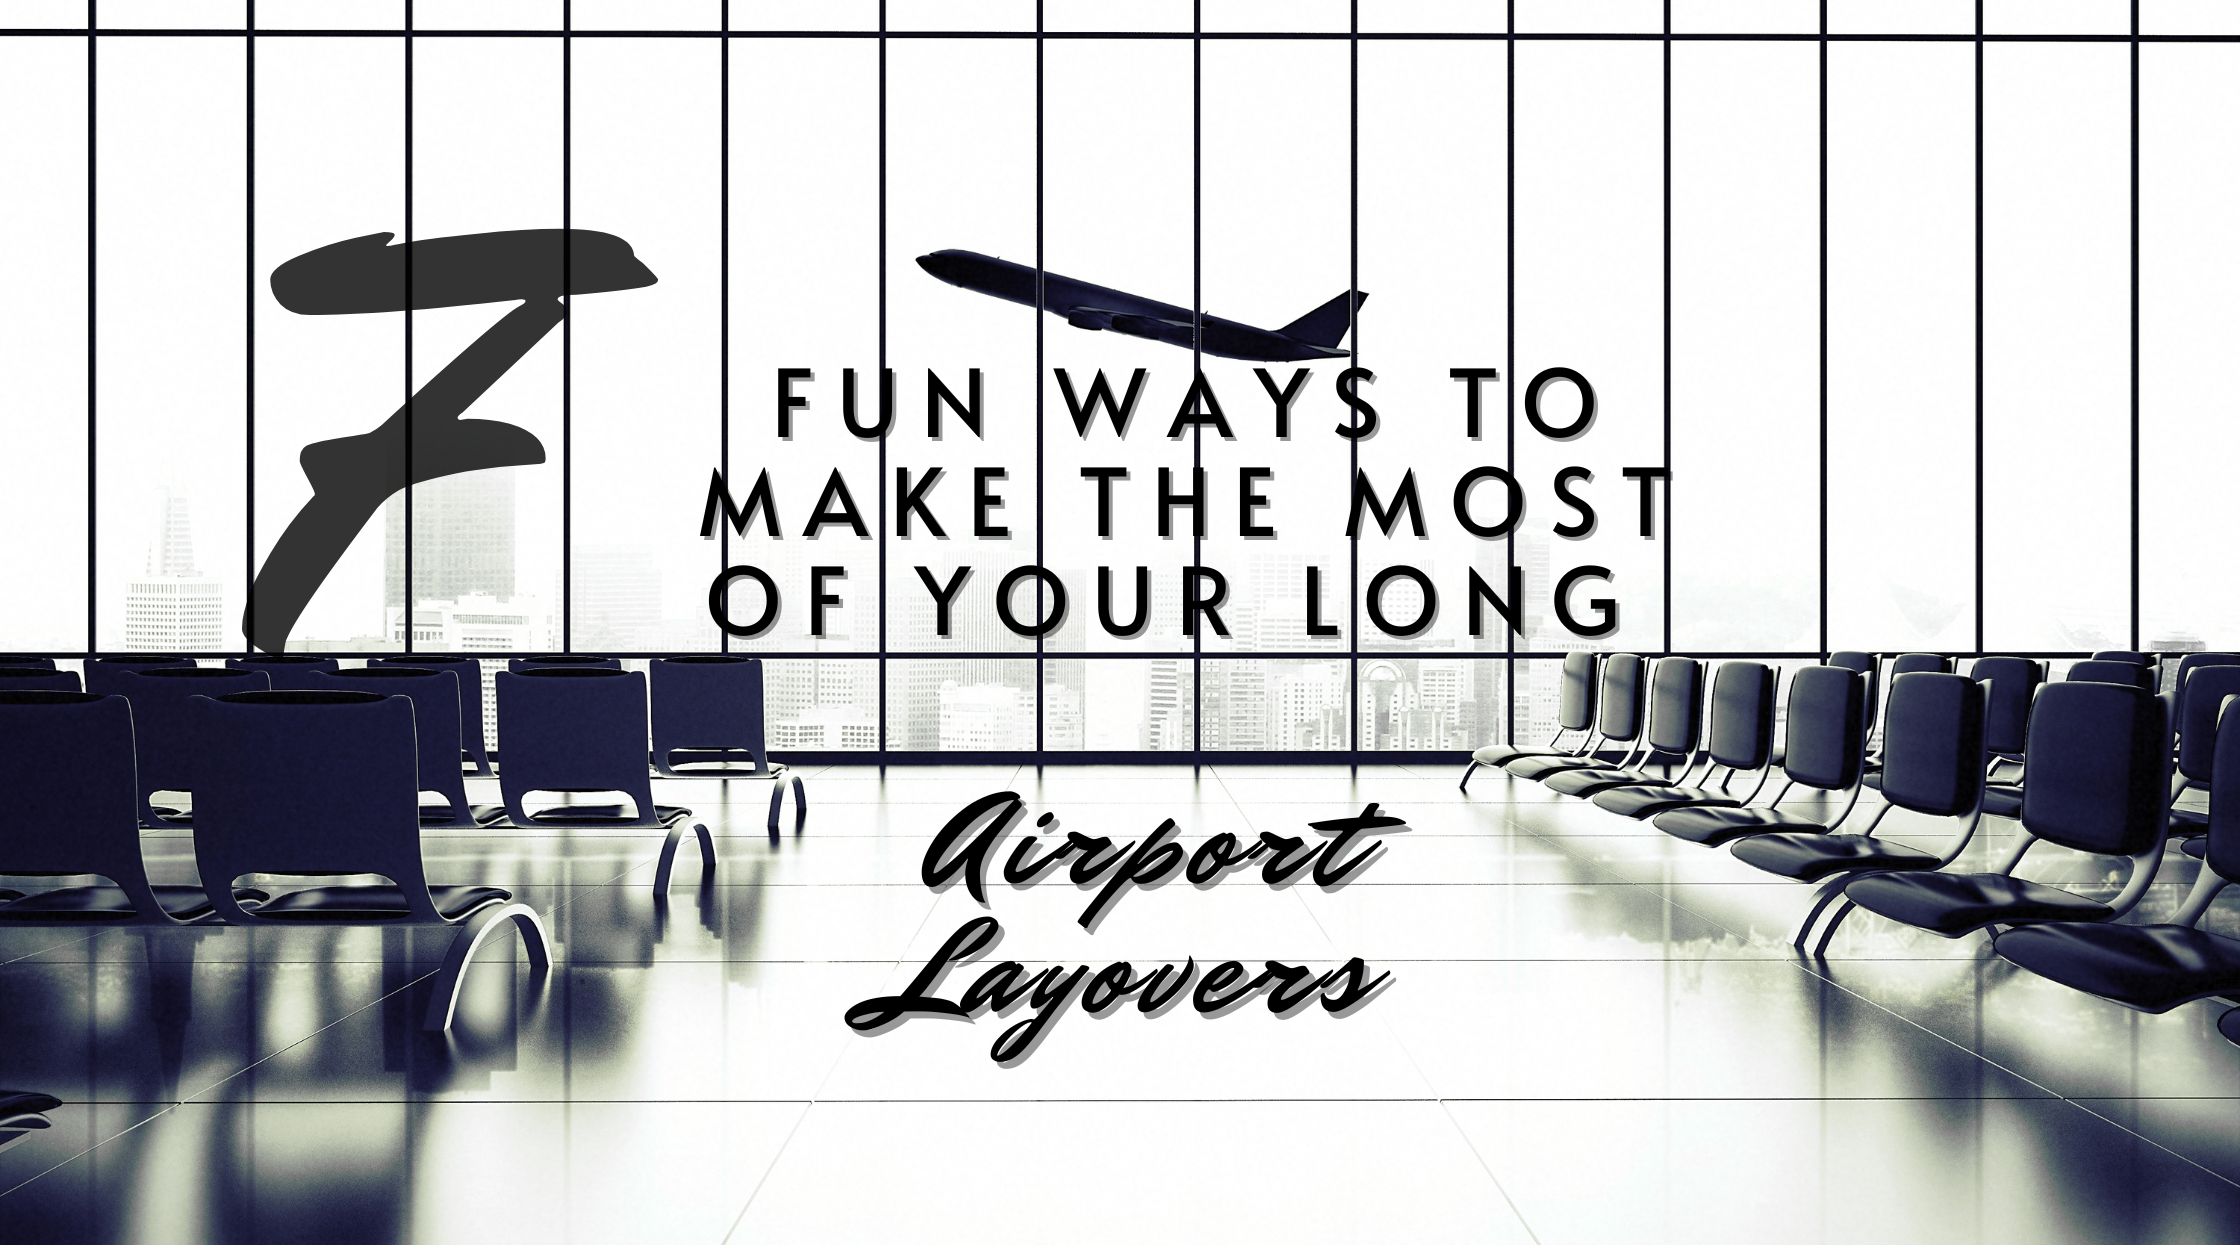 7 FUN WAYS TO MAKE THE MOST OF YOUR LONG AIRPORT LAYOVERS